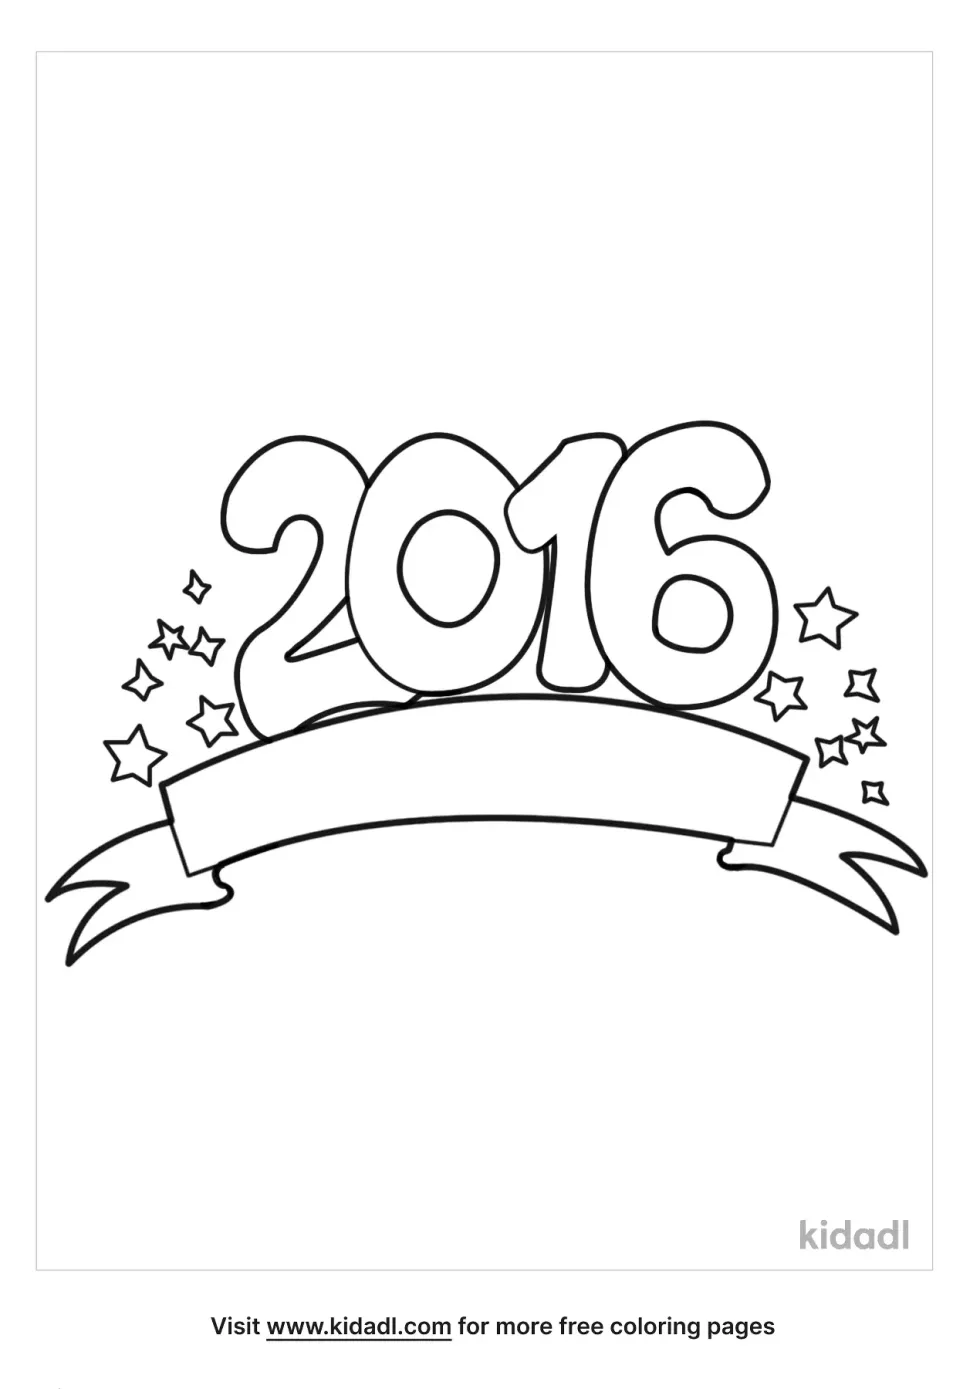 A coloring image showing the text "2016"